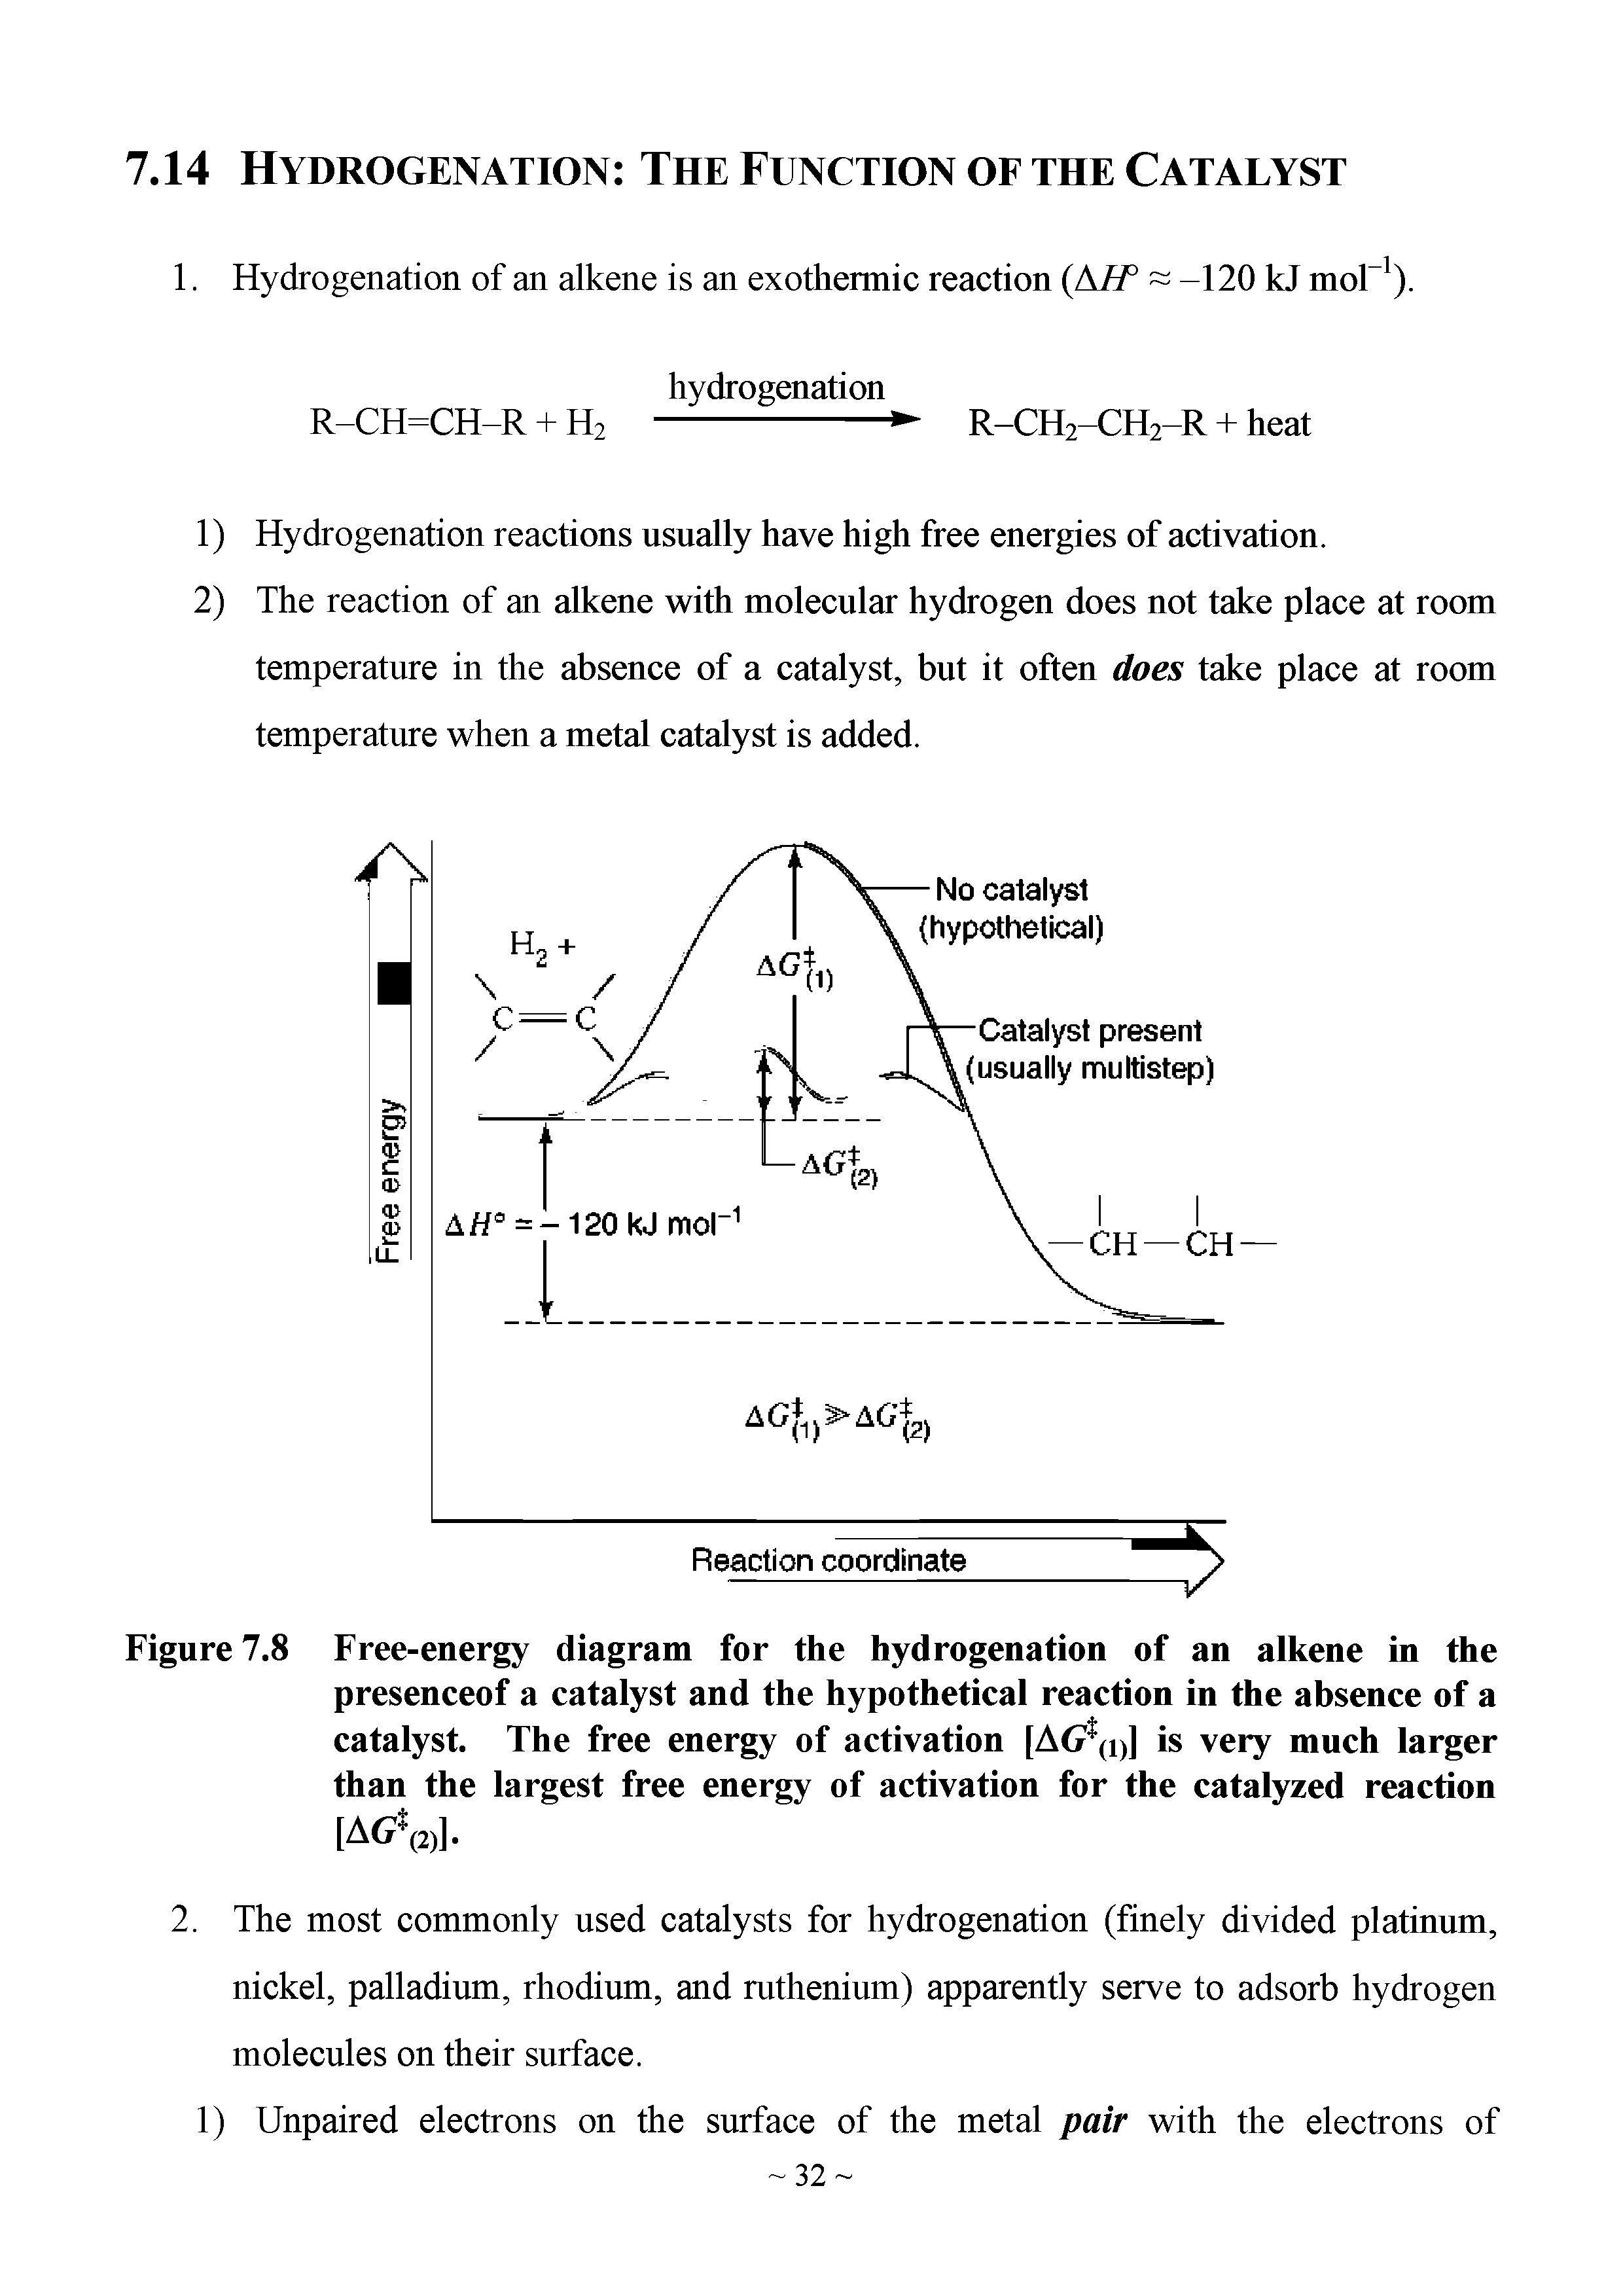 Figure 7.8 Free-energy diagram for the hydrogenation of an alkene in the presenceof a catalyst and the hypothetical reaction in the absence of a catalyst. The free energy of activation [AG (i)] is very much larger than the largest free energy of activation for the catalyzed reaction [AG (2,].